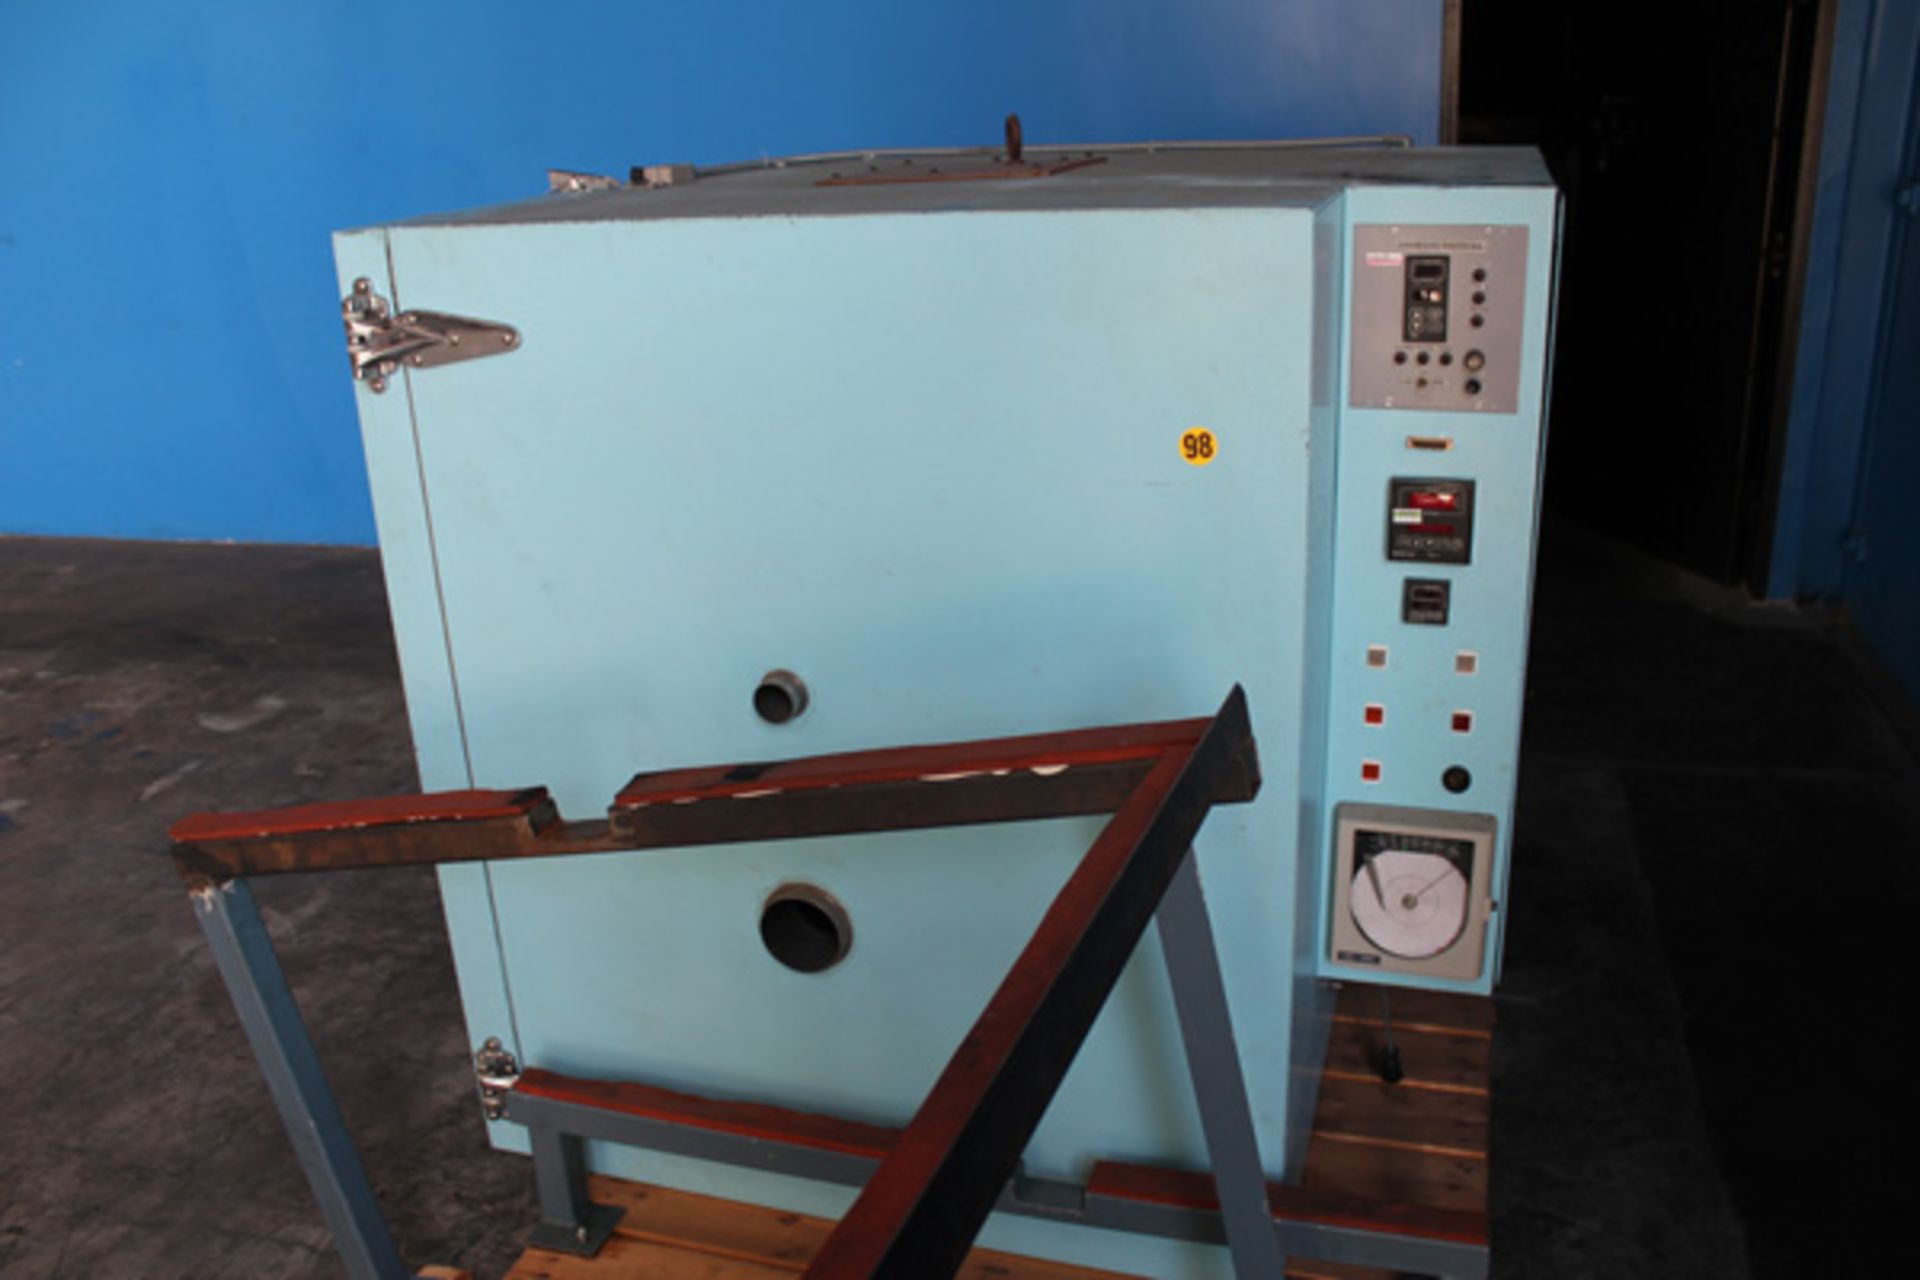 1997 BMA Electric Oven & Cooling | 36" x 36" x 34", Located In: Huntington Park, CA - 5208 - Image 4 of 6